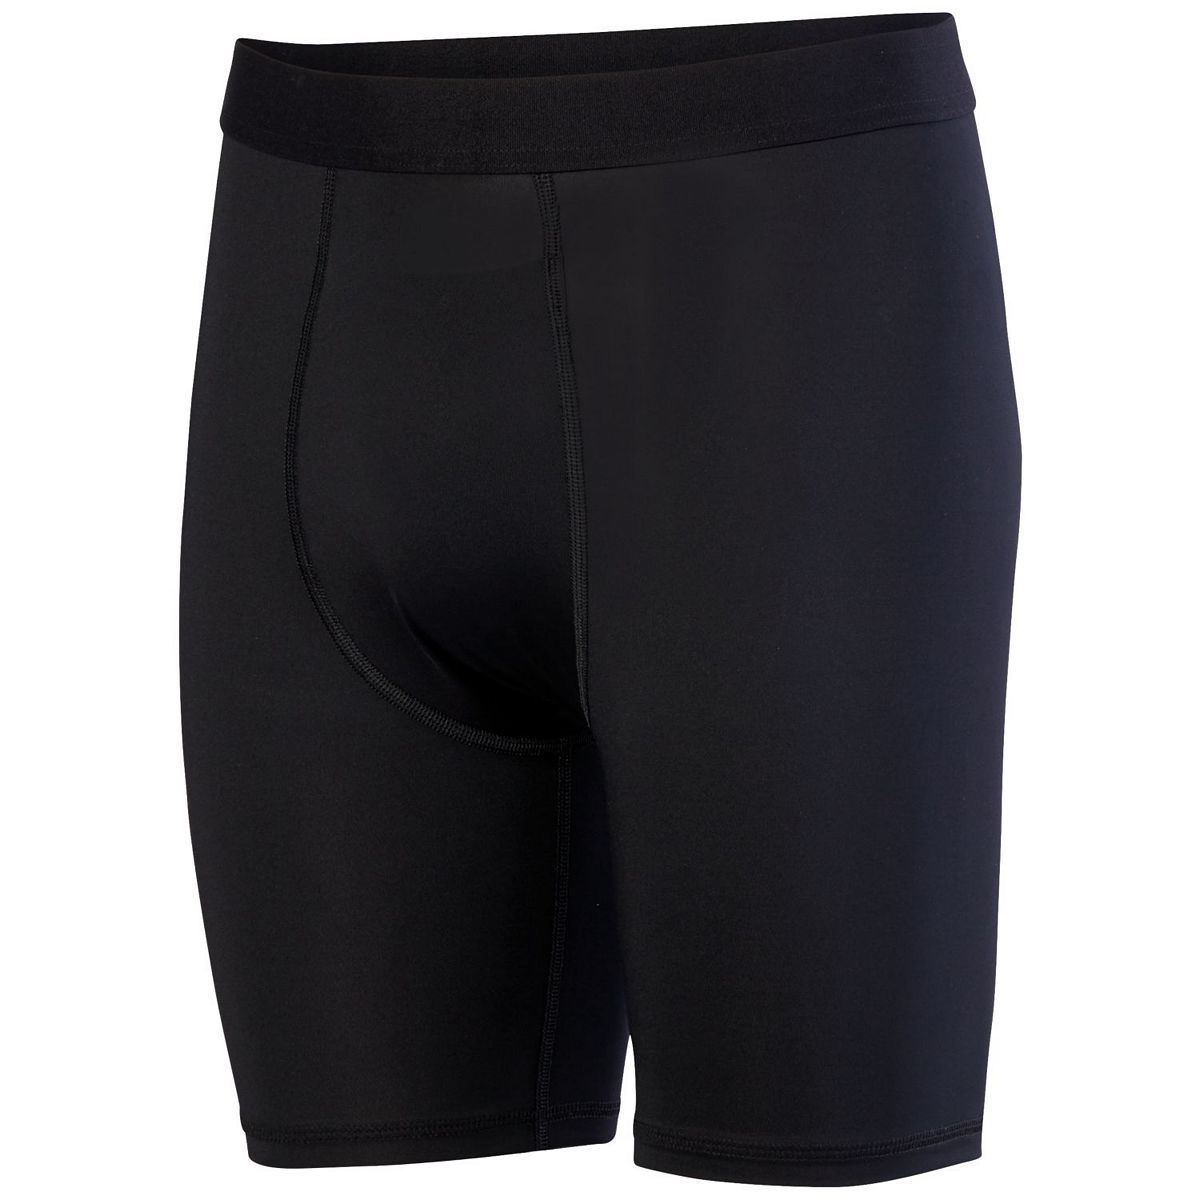 Augusta Sportswear Hyperform Compression Shorts in Black  -Part of the Adult, Adult-Shorts, Augusta-Products product lines at KanaleyCreations.com